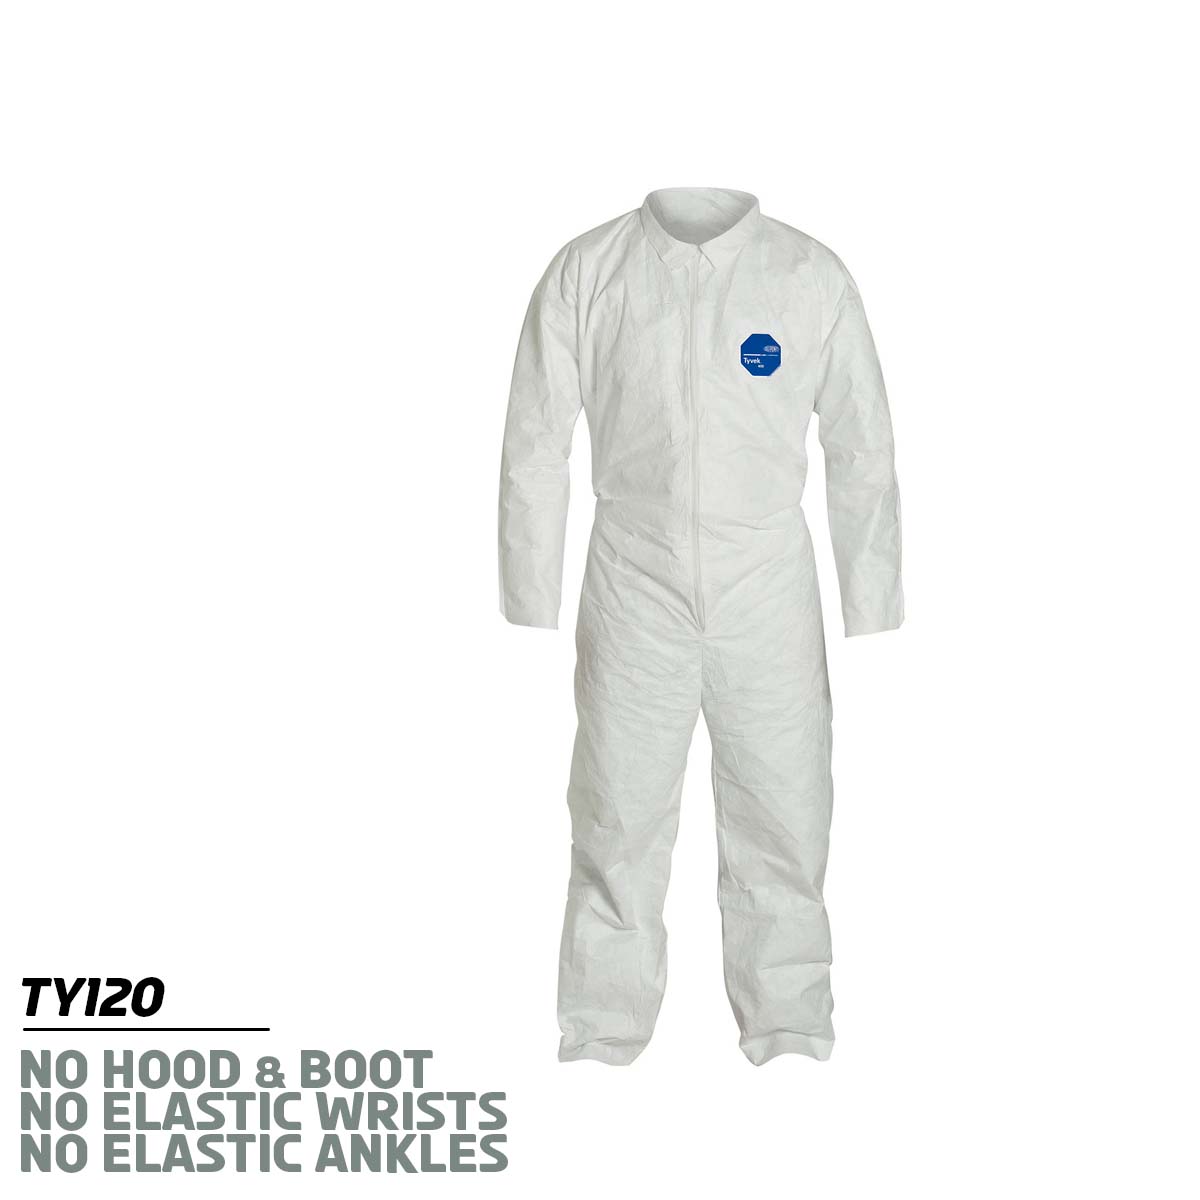 No Hood • No Boots / No Elastic / Medium DuPont™ White Tyvek® 400 Disposable Coveralls Work Safety Protective Gear